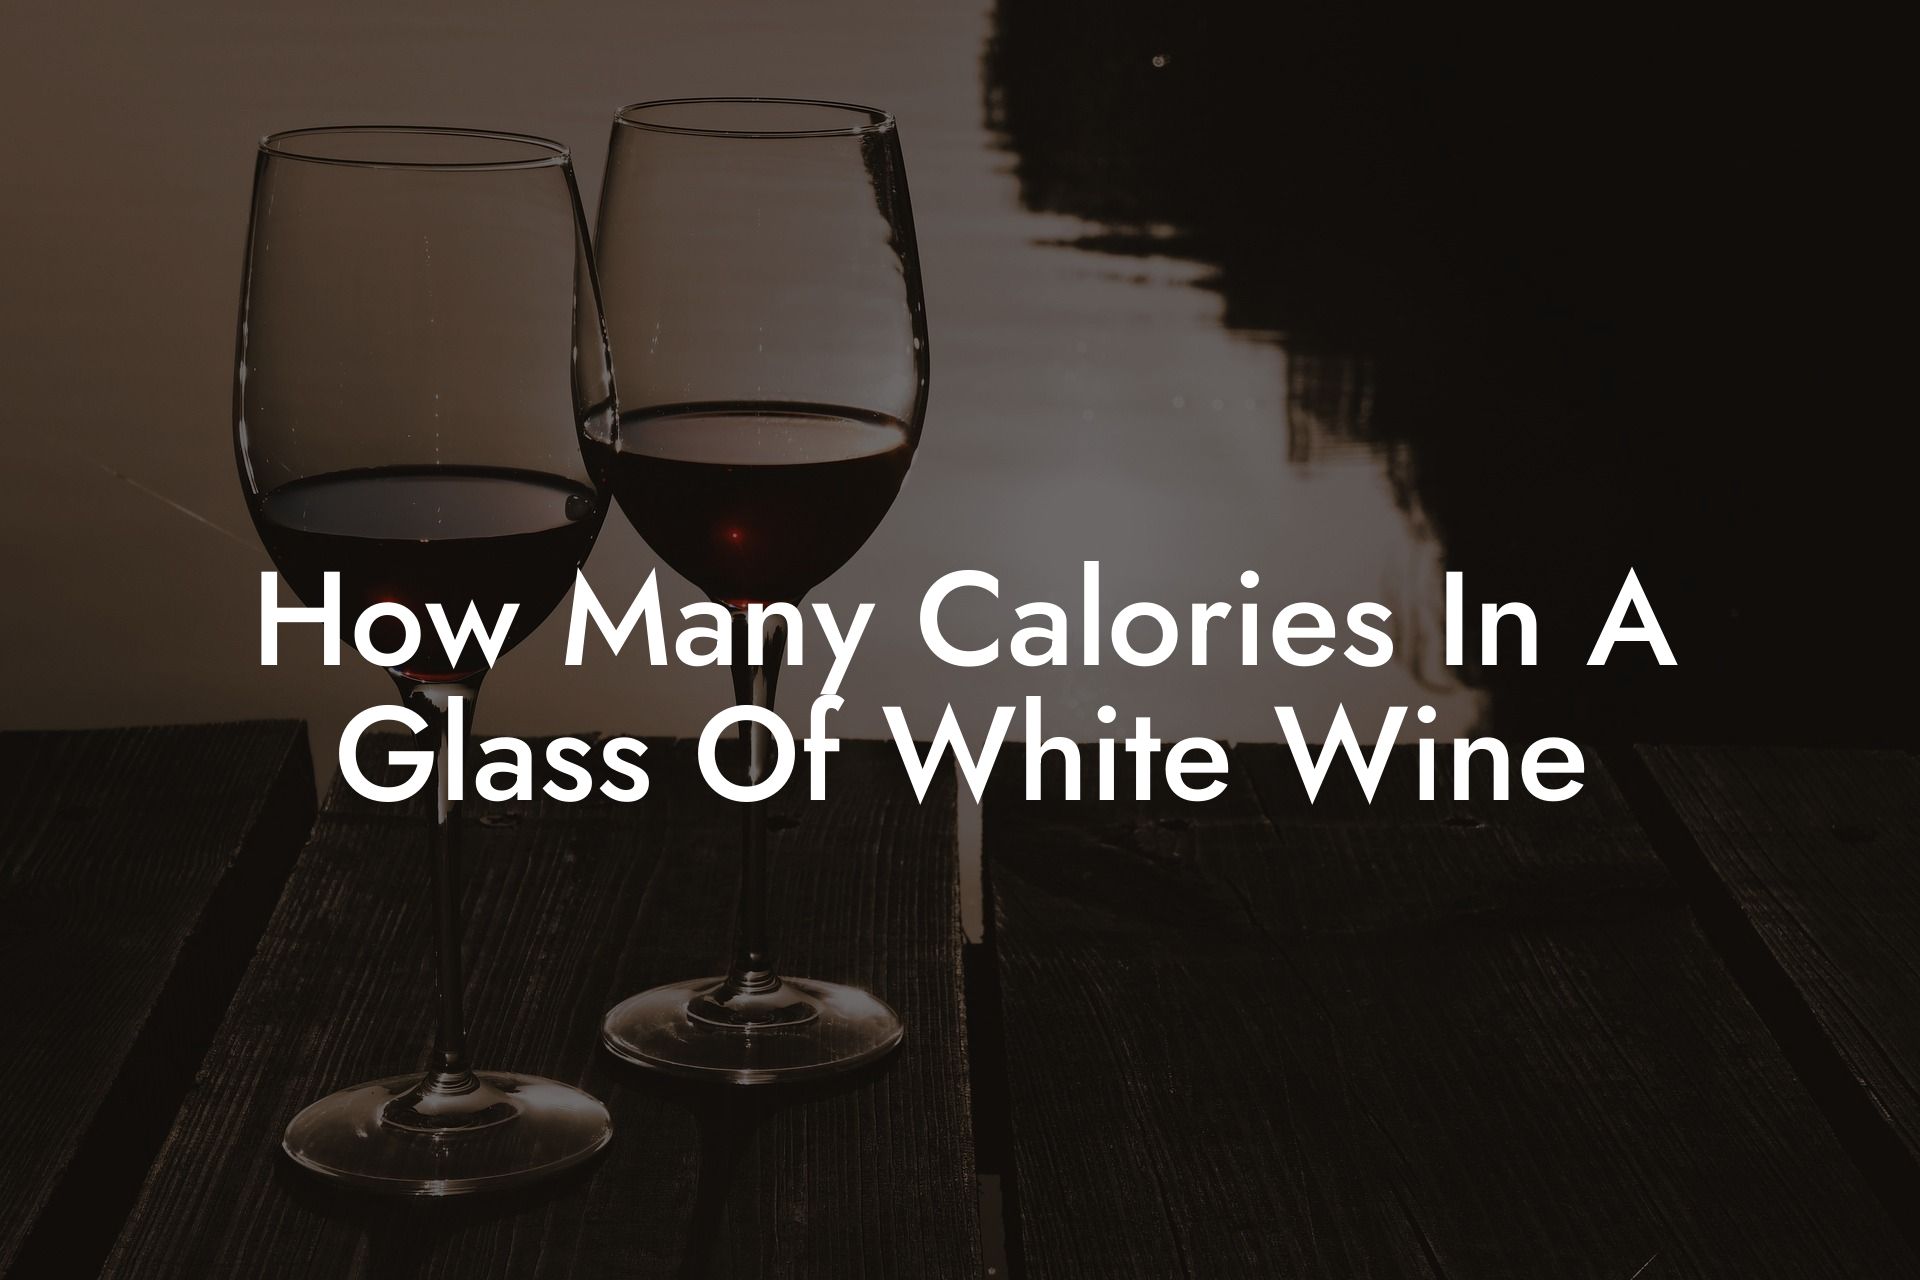 How Many Calories In A Glass Of White Wine